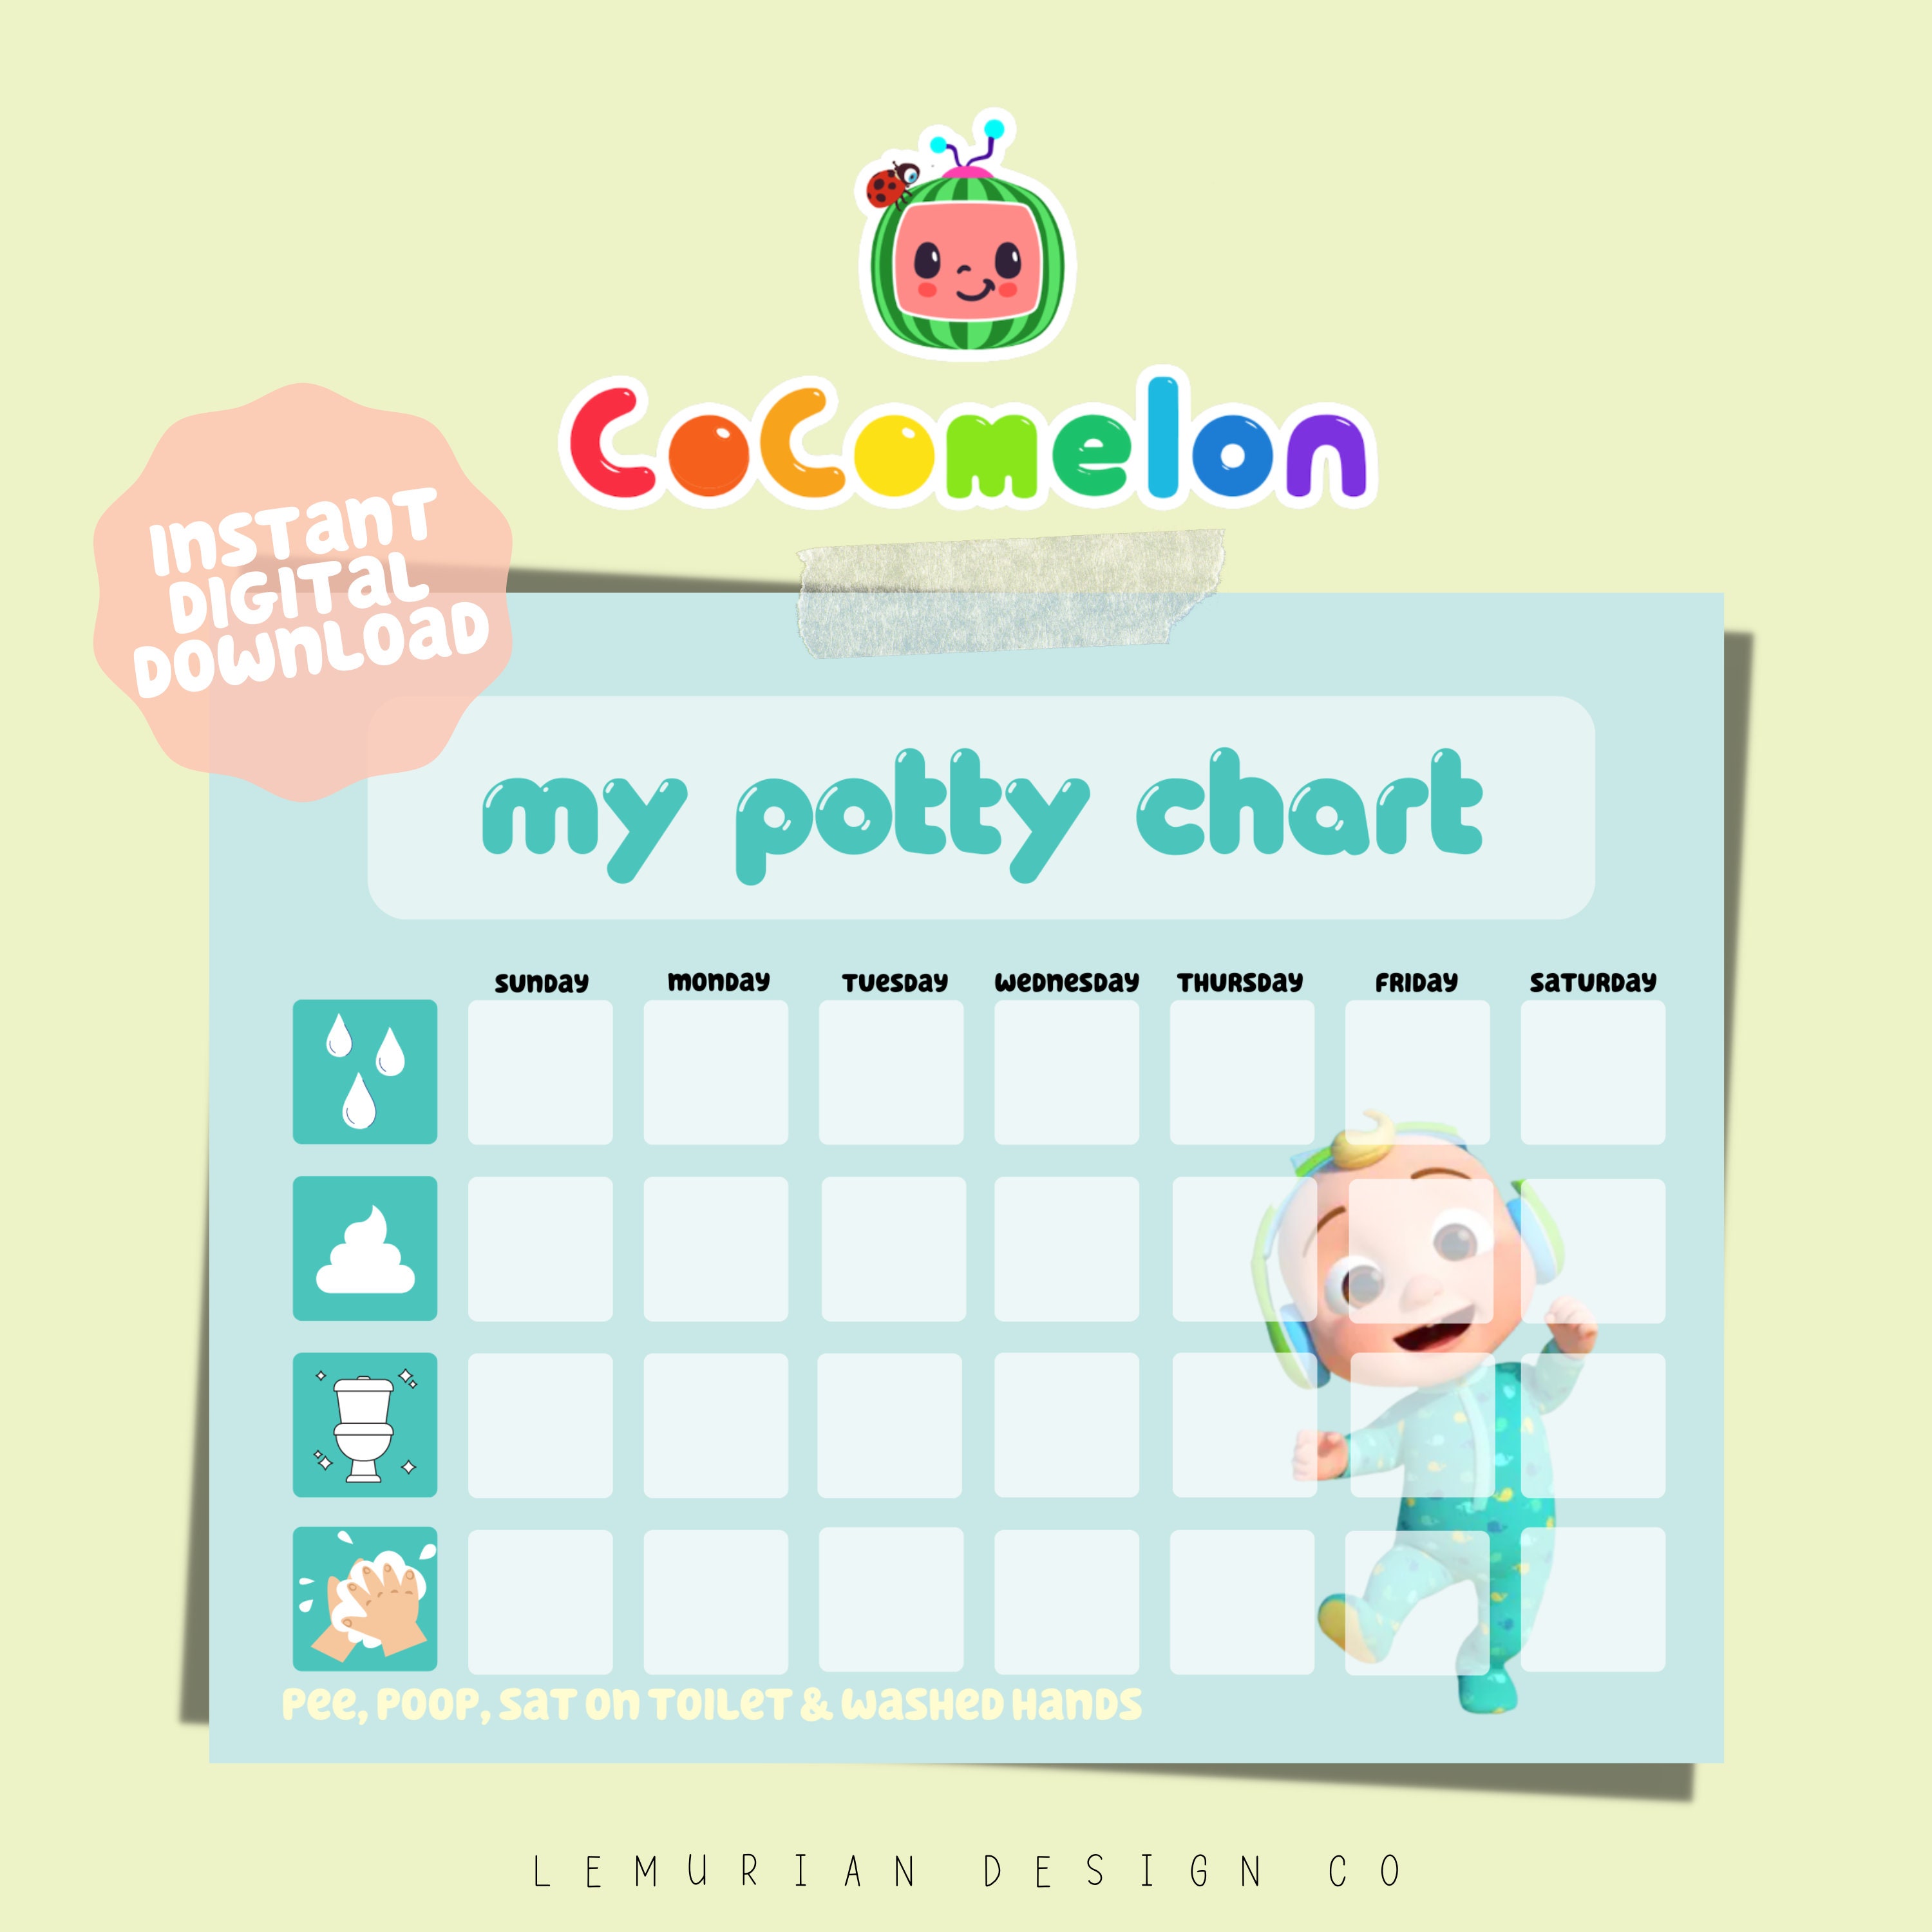 cocomelon-potty-chart-for-kids-toddler-bathroom-reward-etsy-india